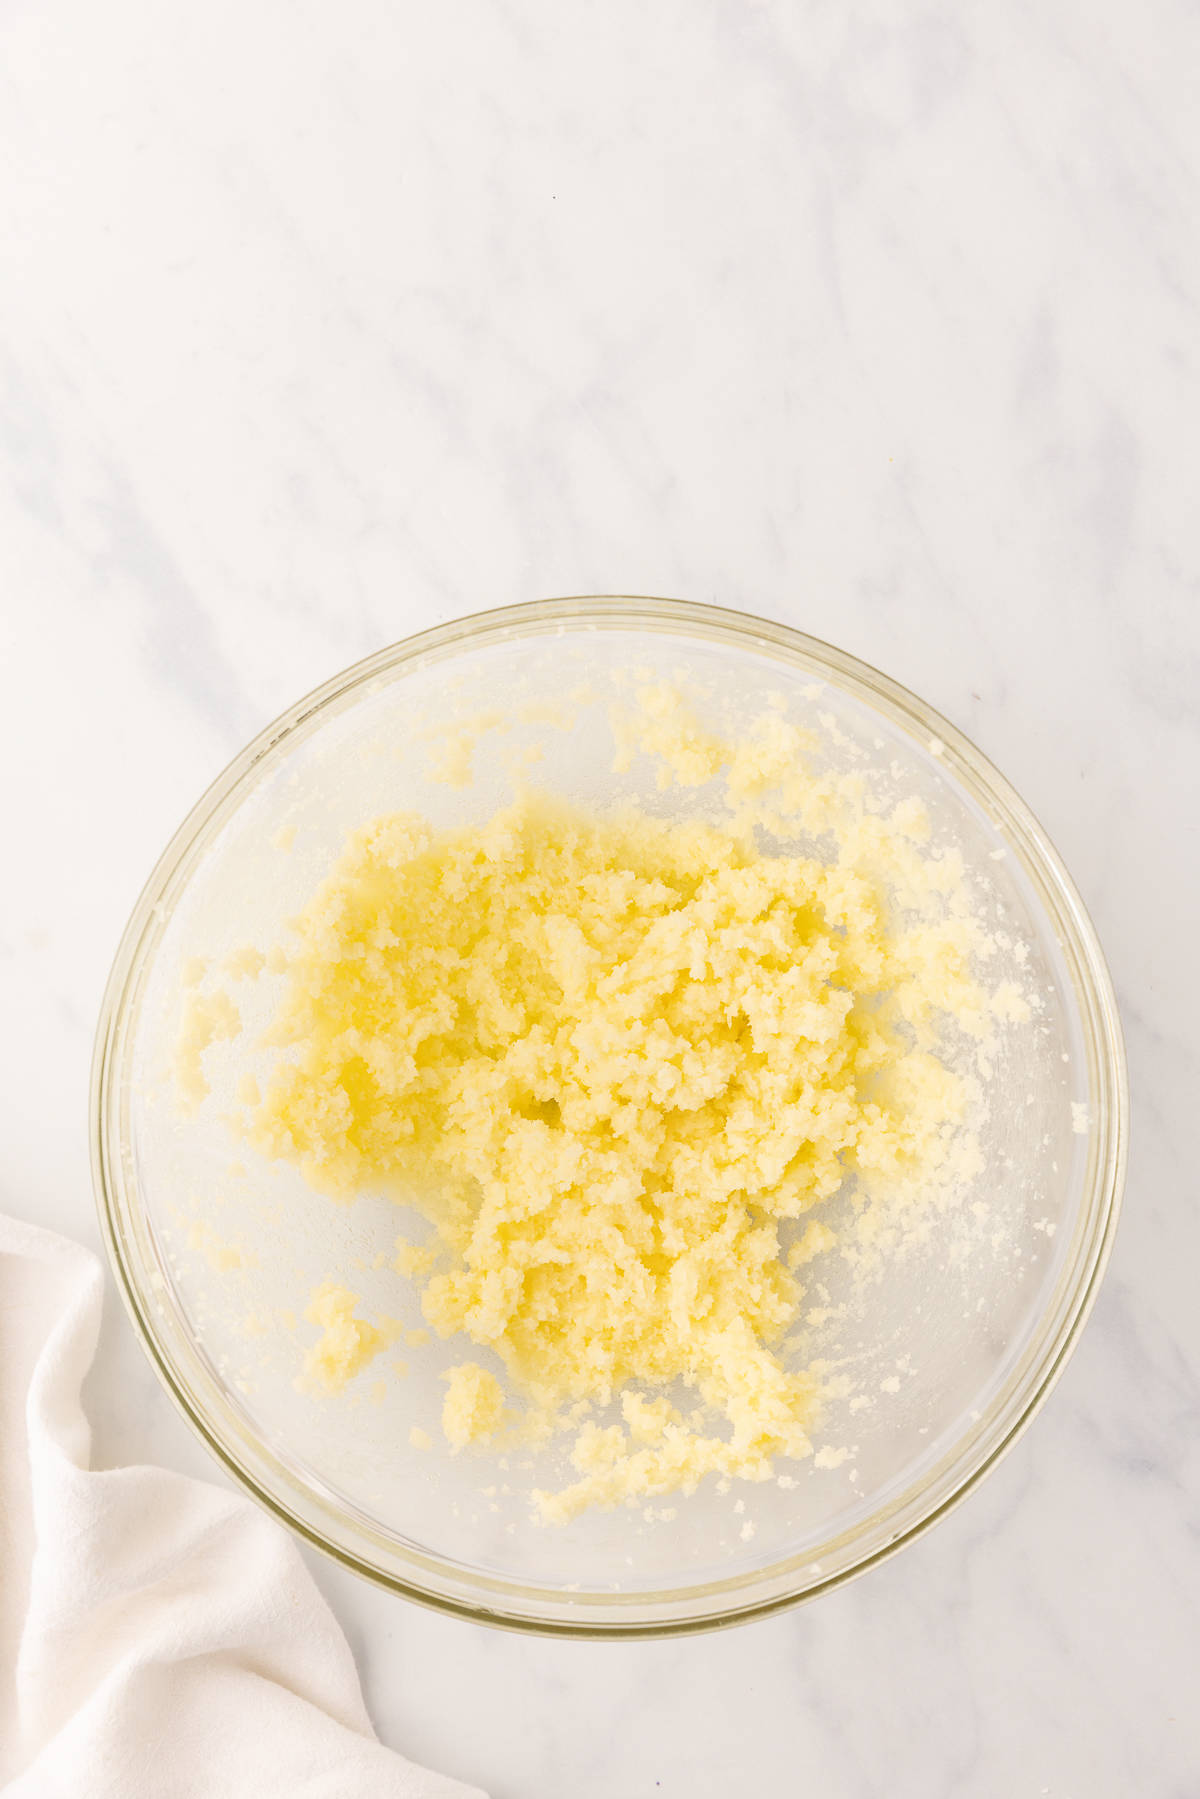 Butter and sugar beat together in a glass bowl.